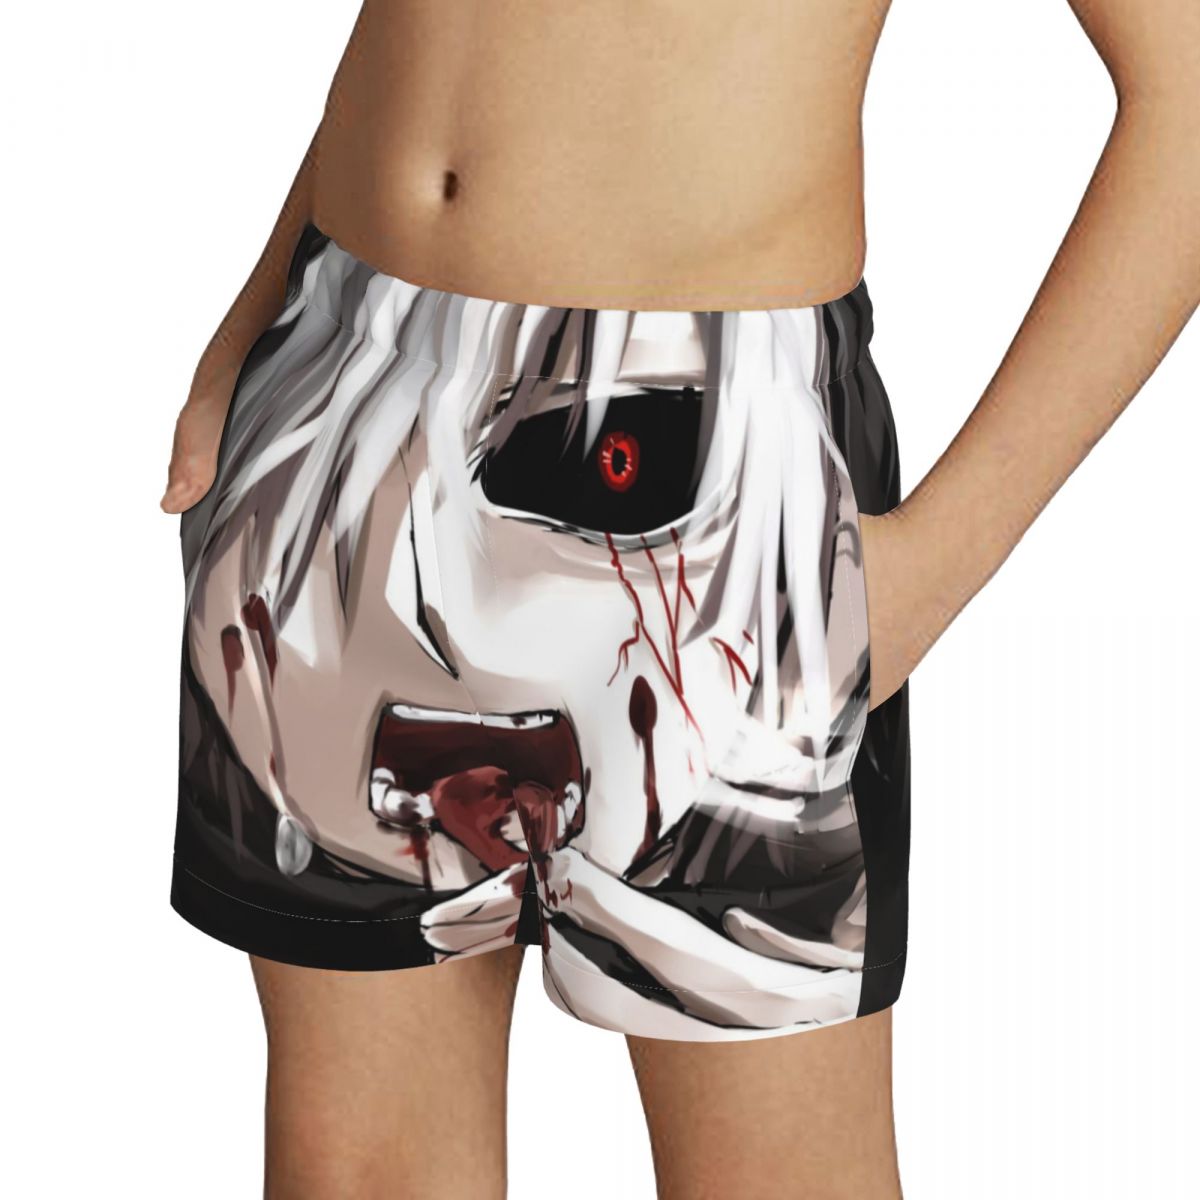 Tokyo Ghoul Hot sell swimming Trunks boy s Beach shorts Hi Q Swimwear with Pocket trunks 3 - Anime Swimsuits